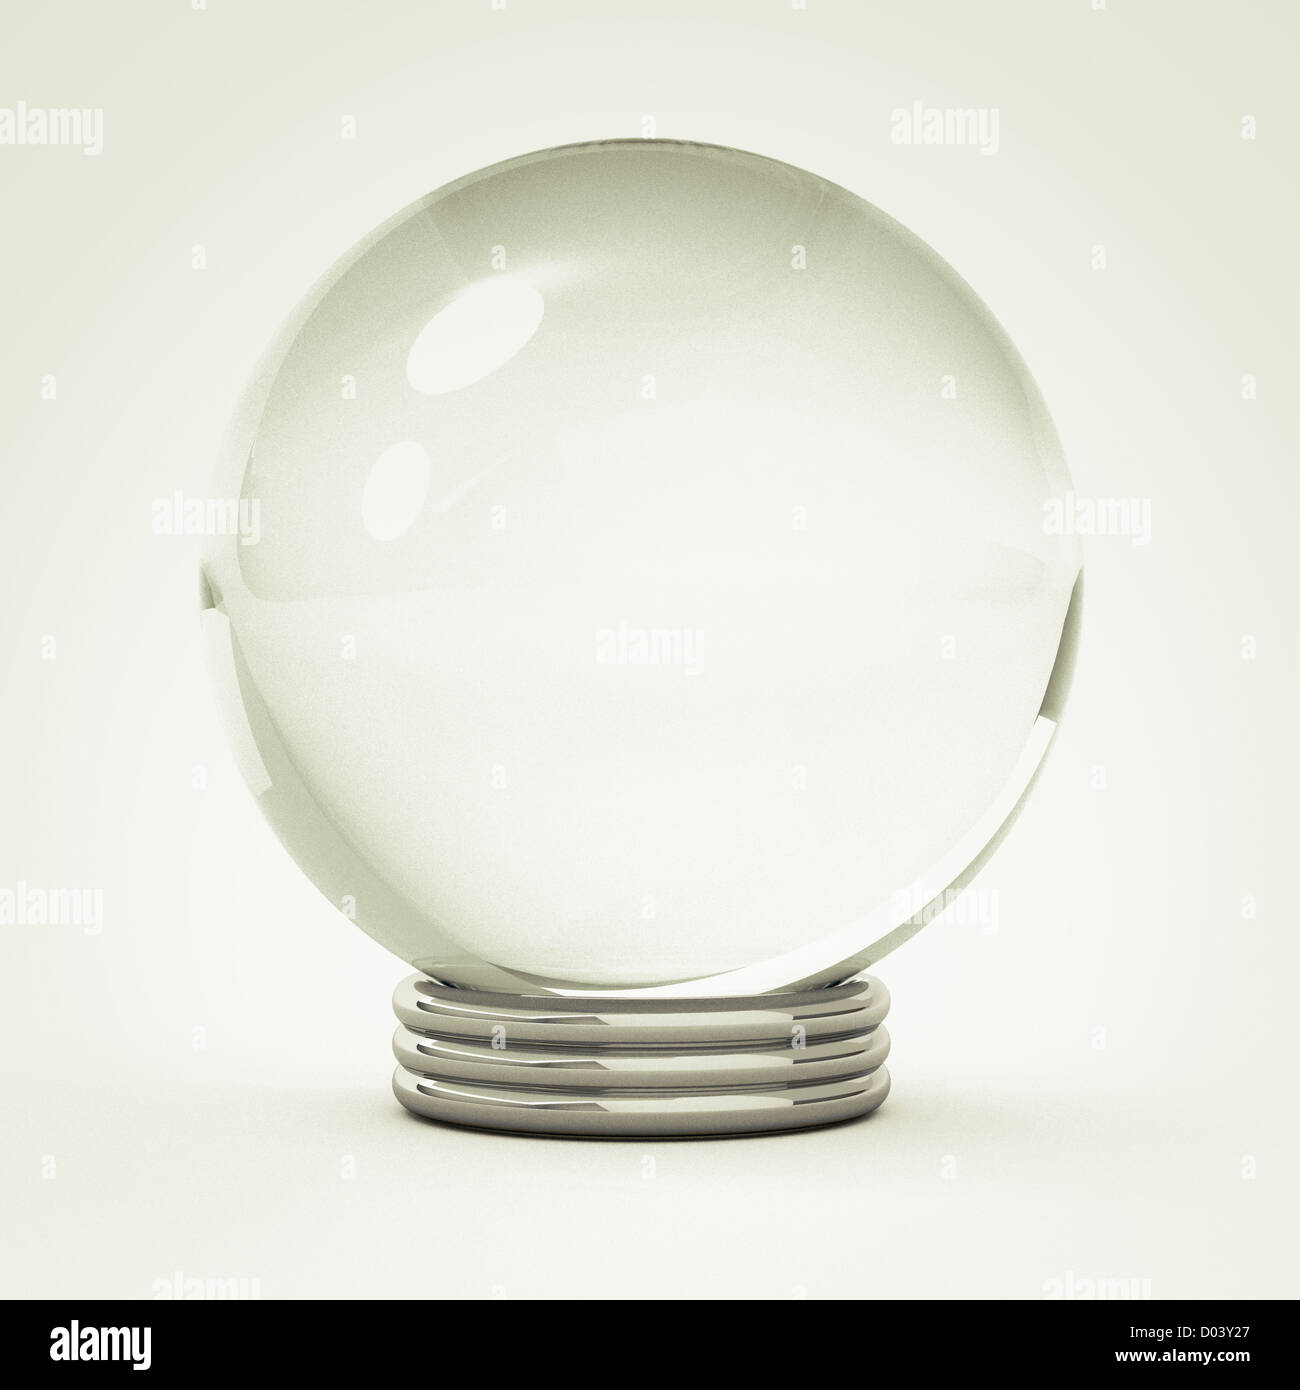 crystal ball for future or fortune teller concepts. 3 clipping path in jpg, ball, base and the whole object. Stock Photo